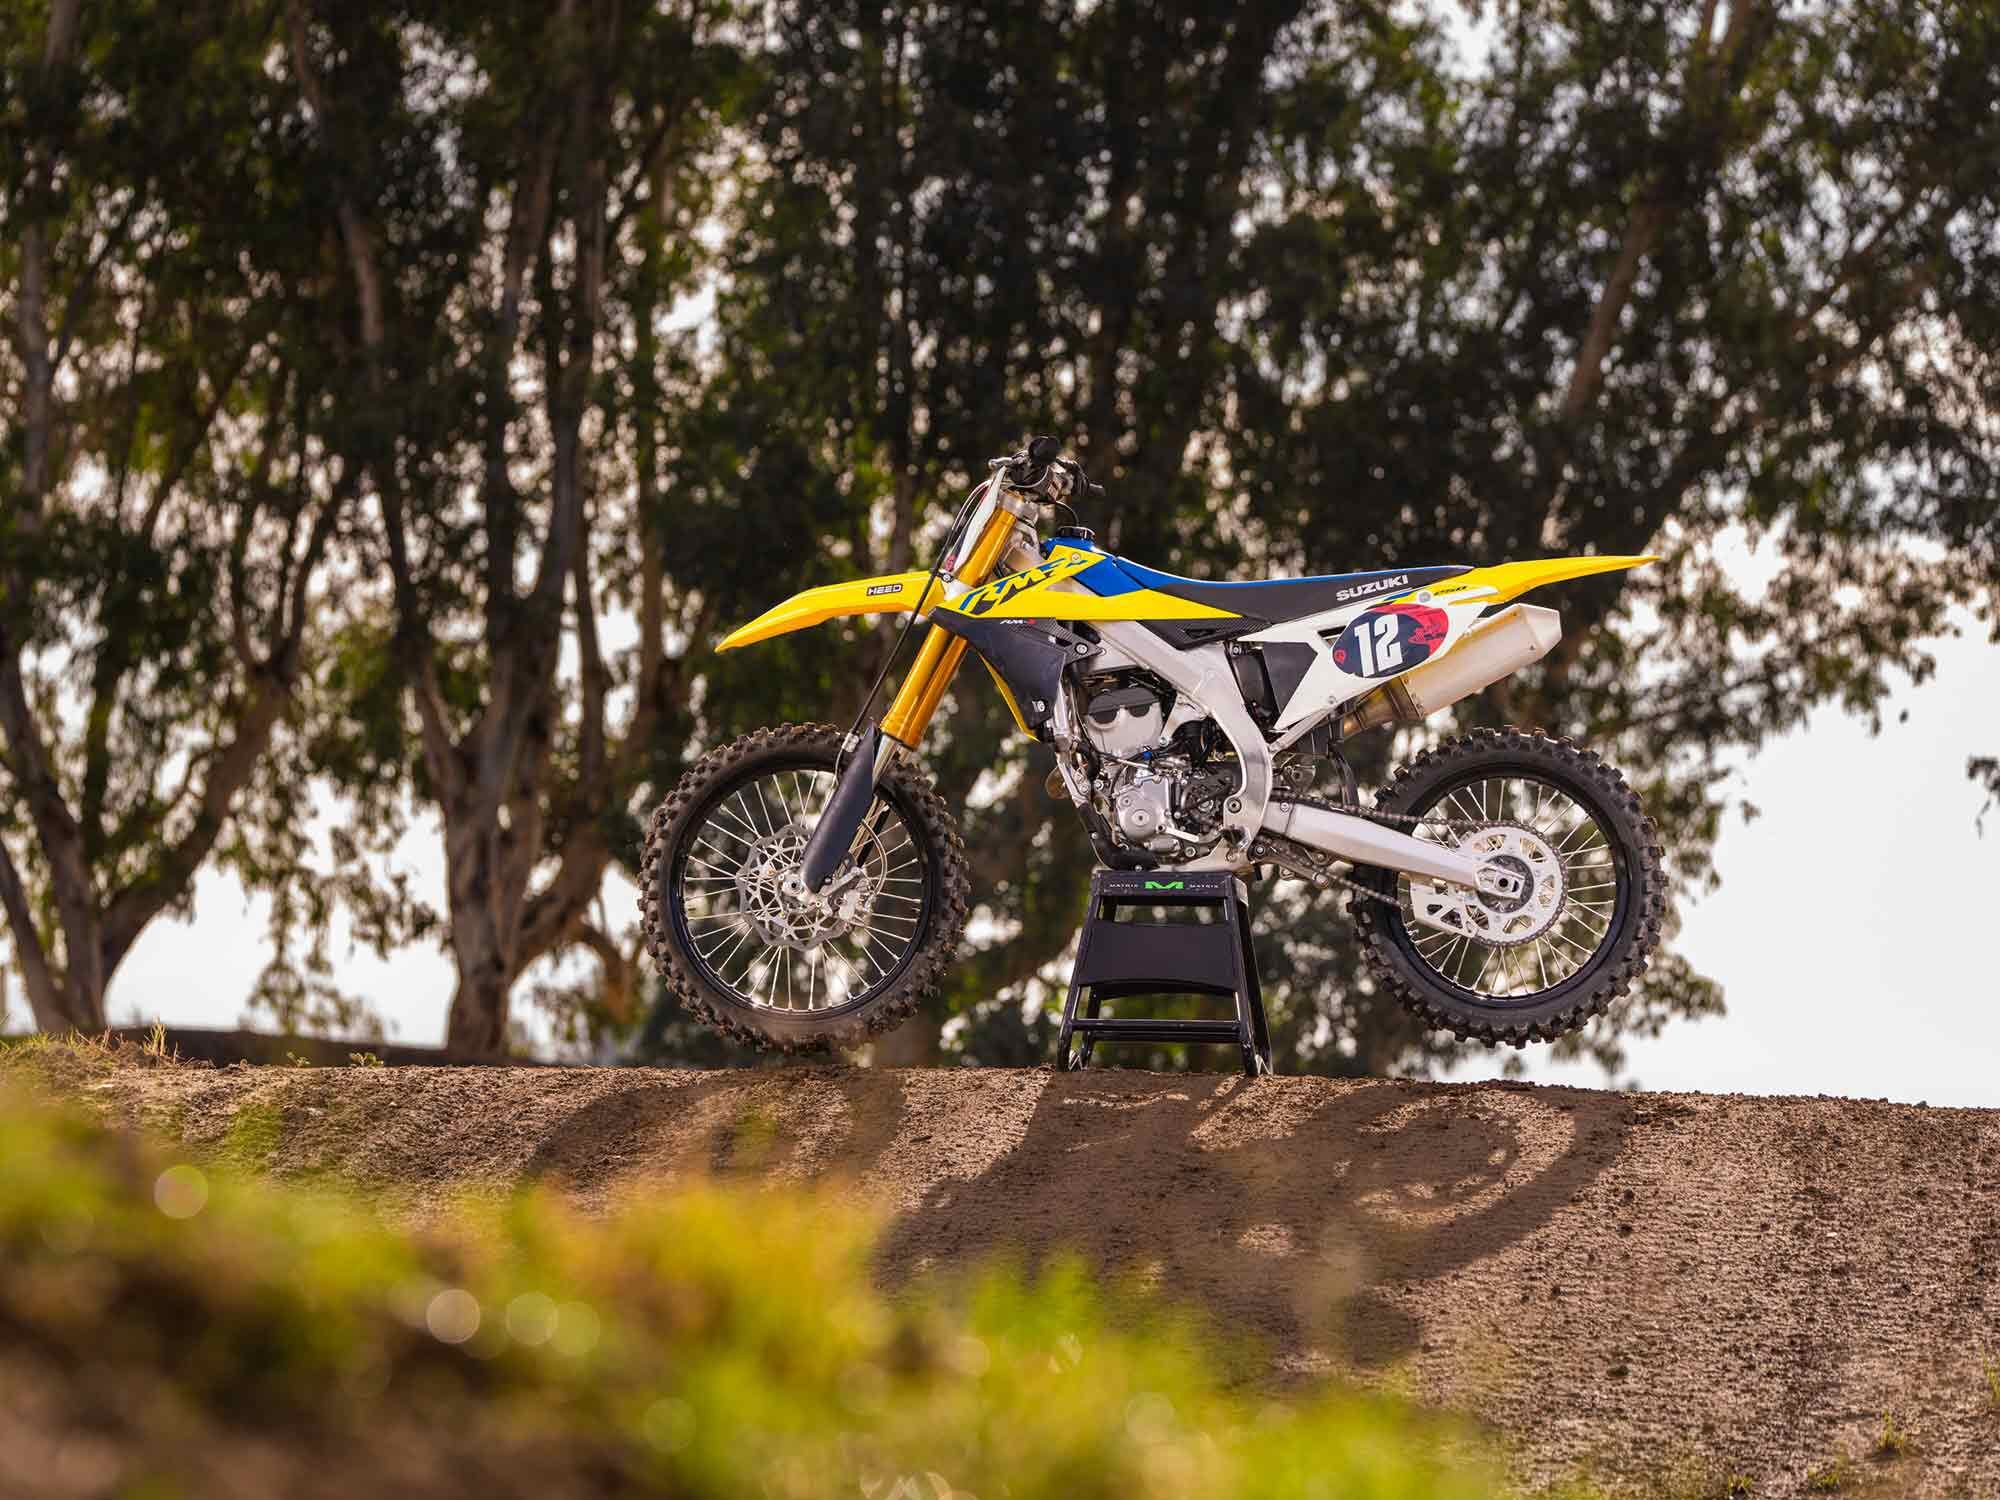 We take a ride aboard Suzuki’s RM-Z250 dirt bike in this review.